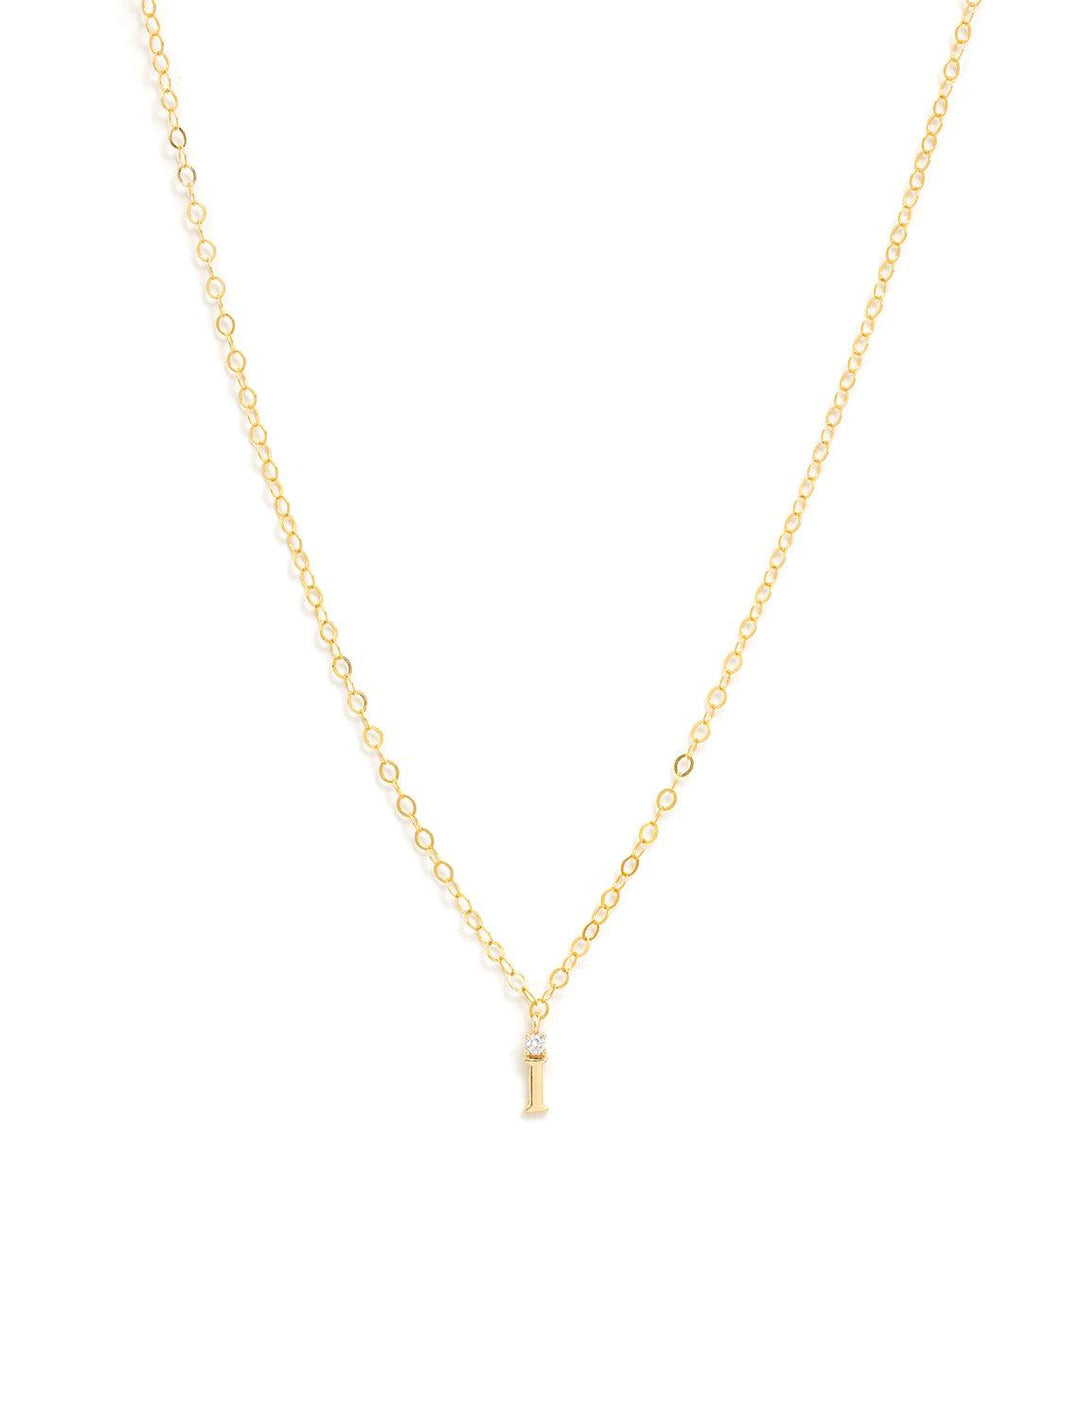 Marit Rae initial and cz necklace in gold | I - Twigs